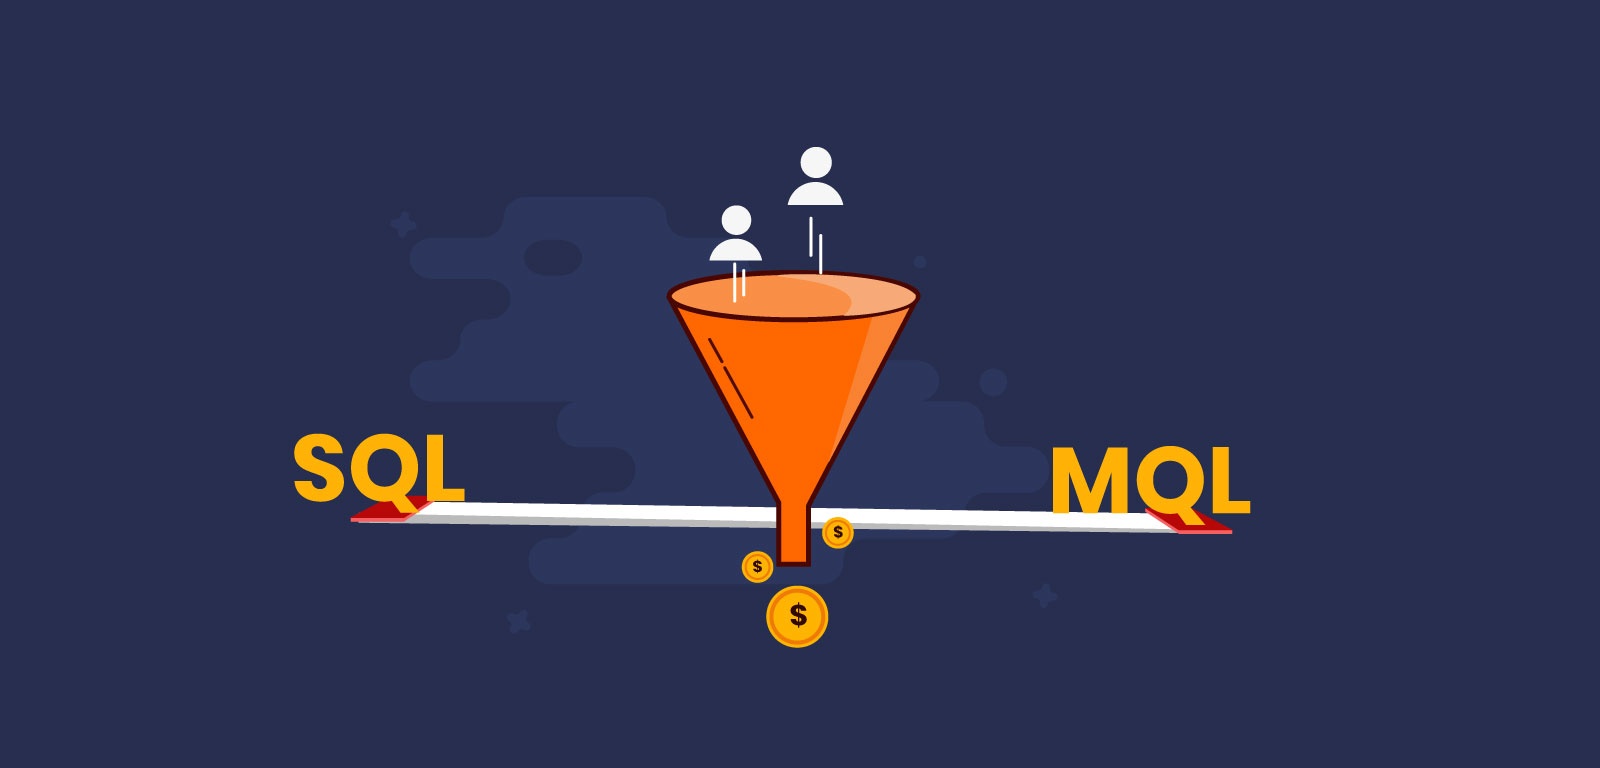 Differences between SQL and MQL